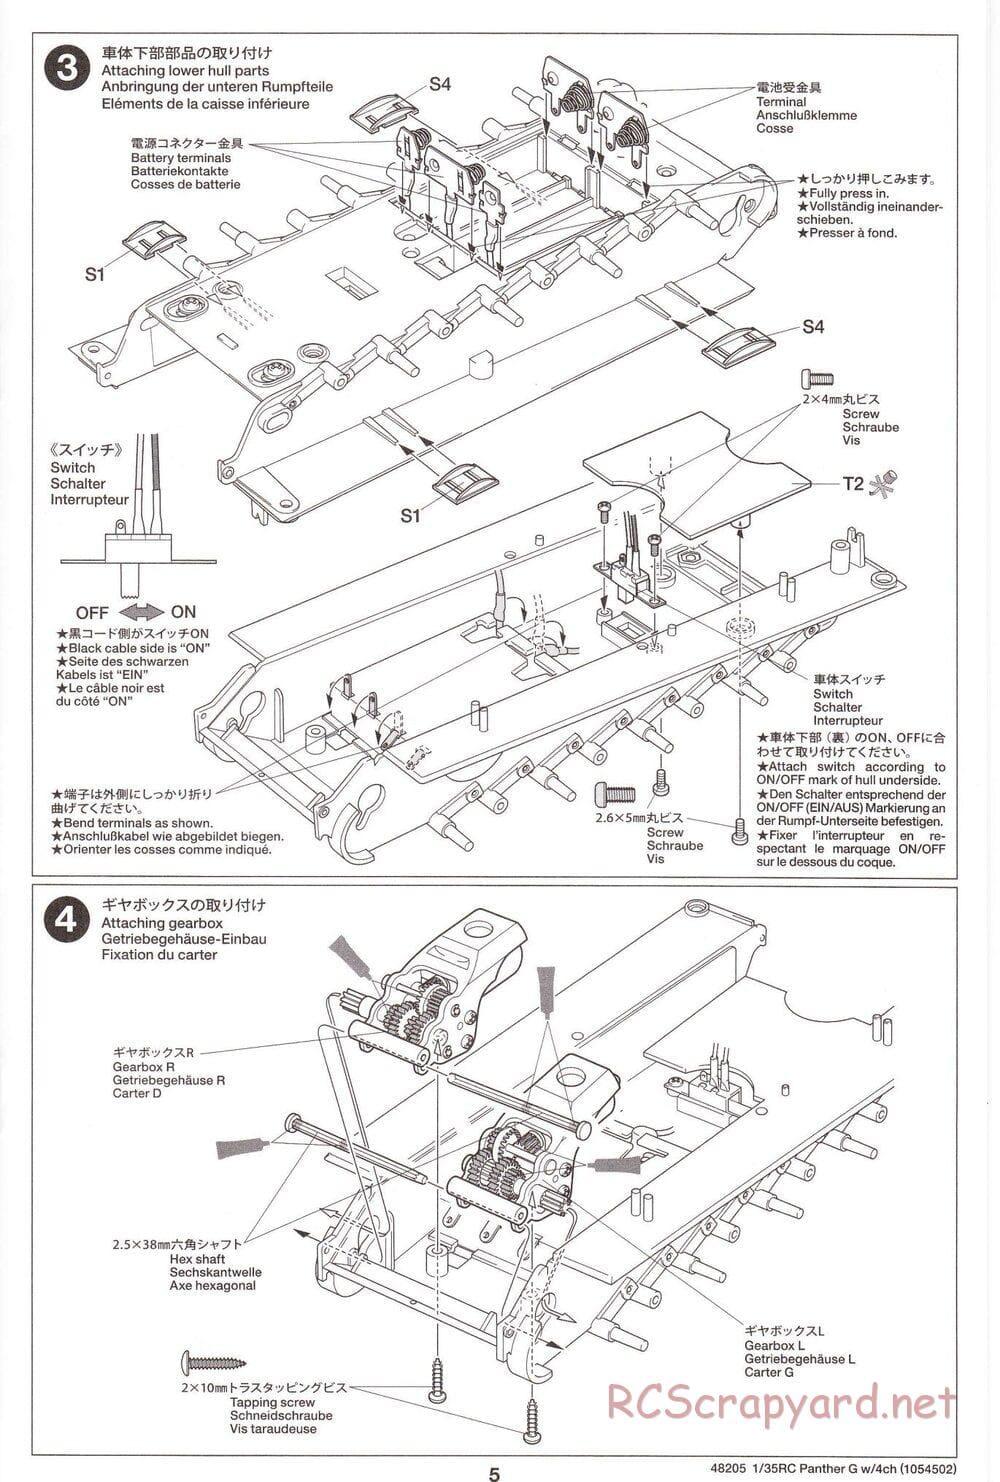 Tamiya - German Panther Type G - 1/35 Scale Chassis - Manual - Page 5